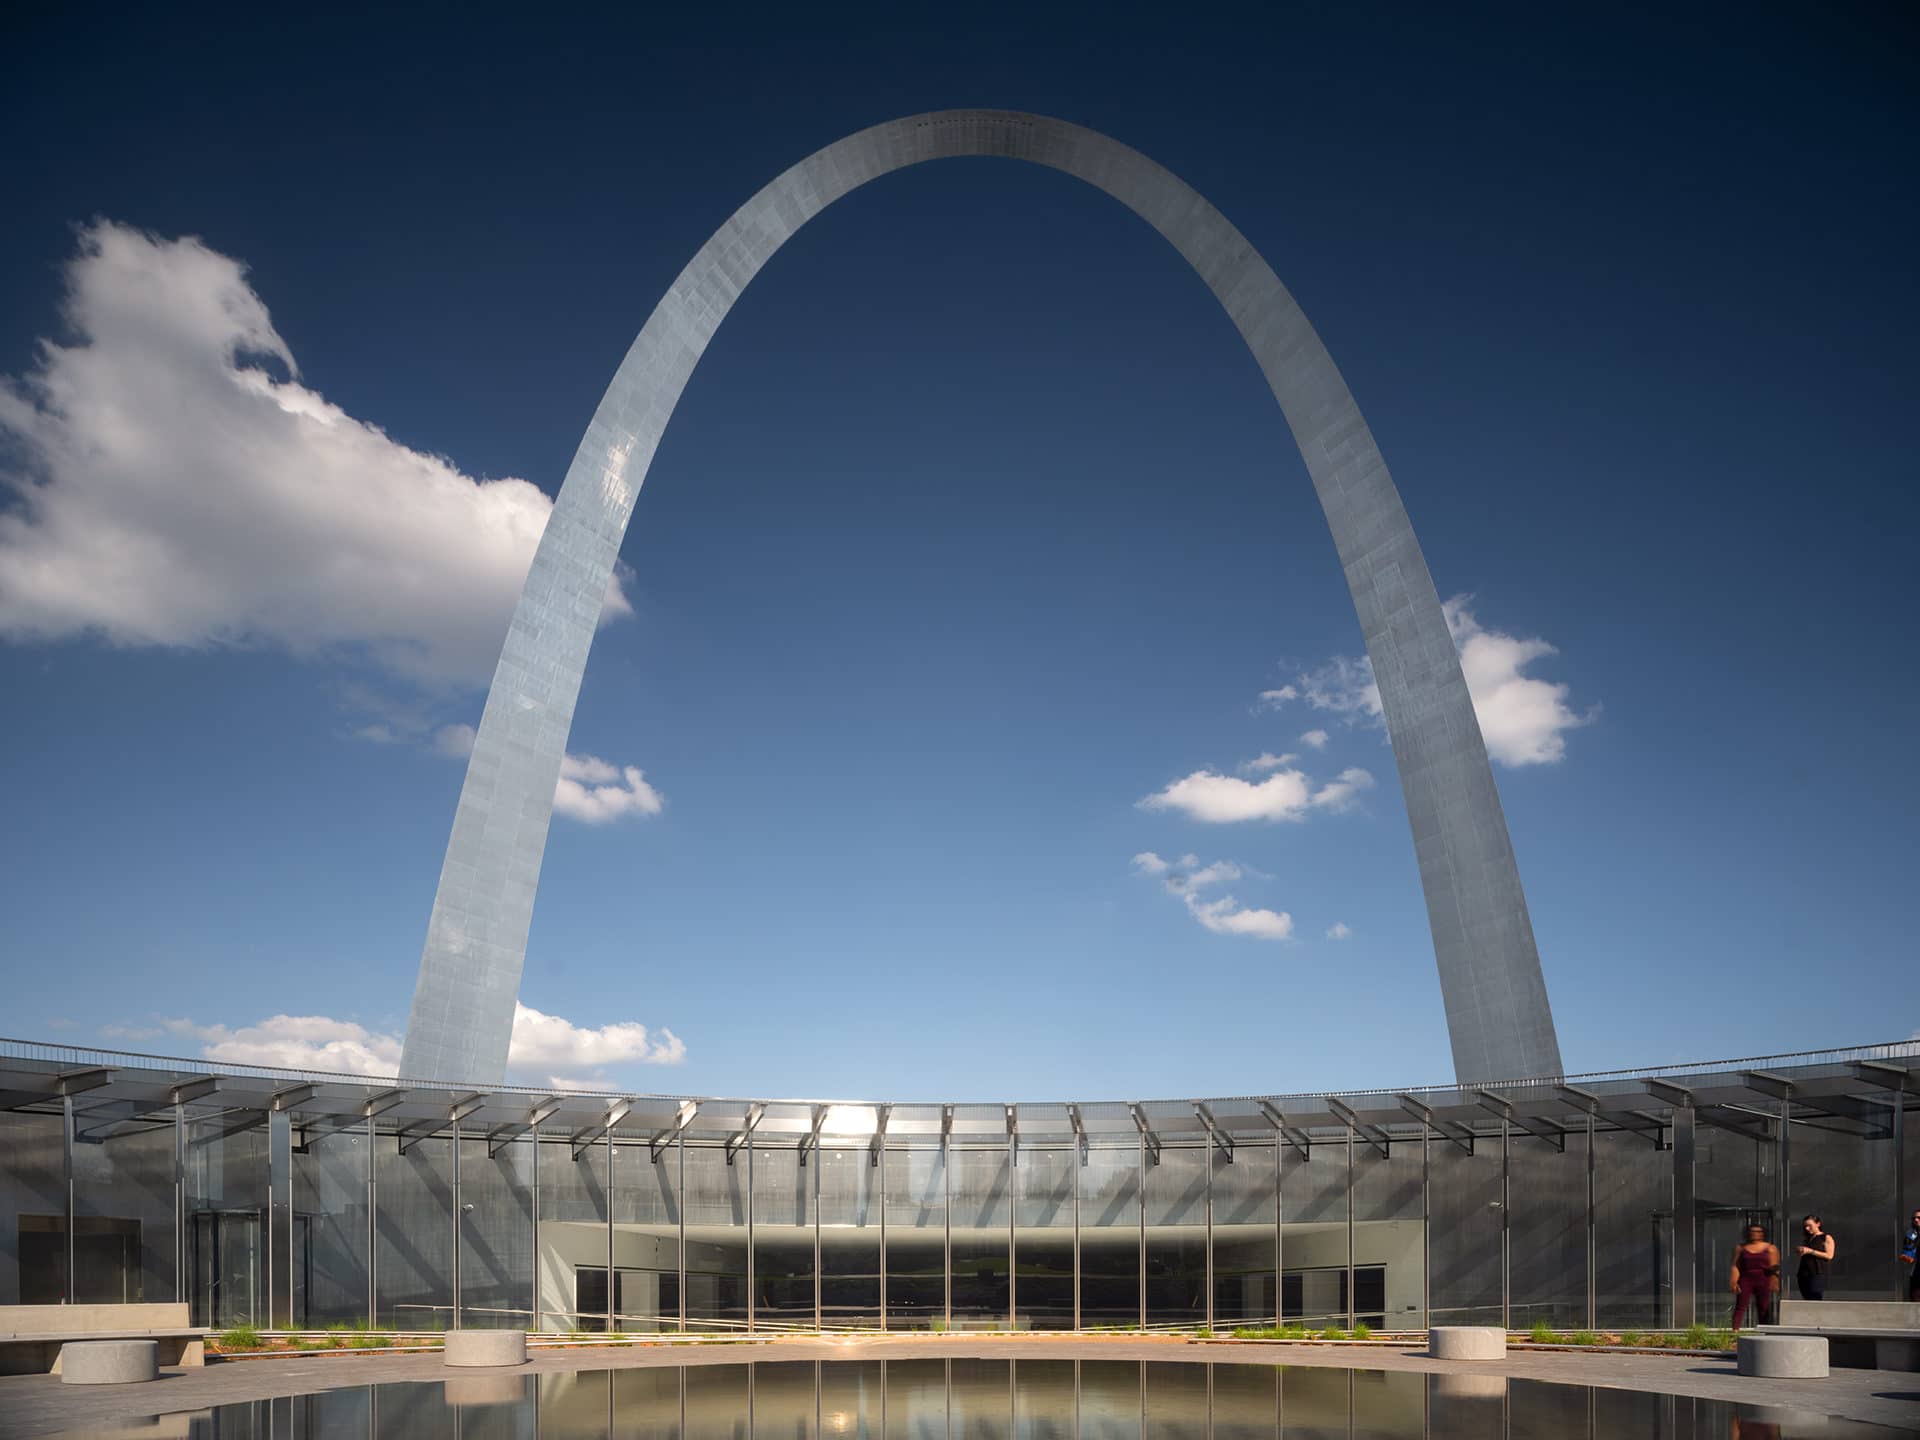 Museum Architecture Firm in St. Louis